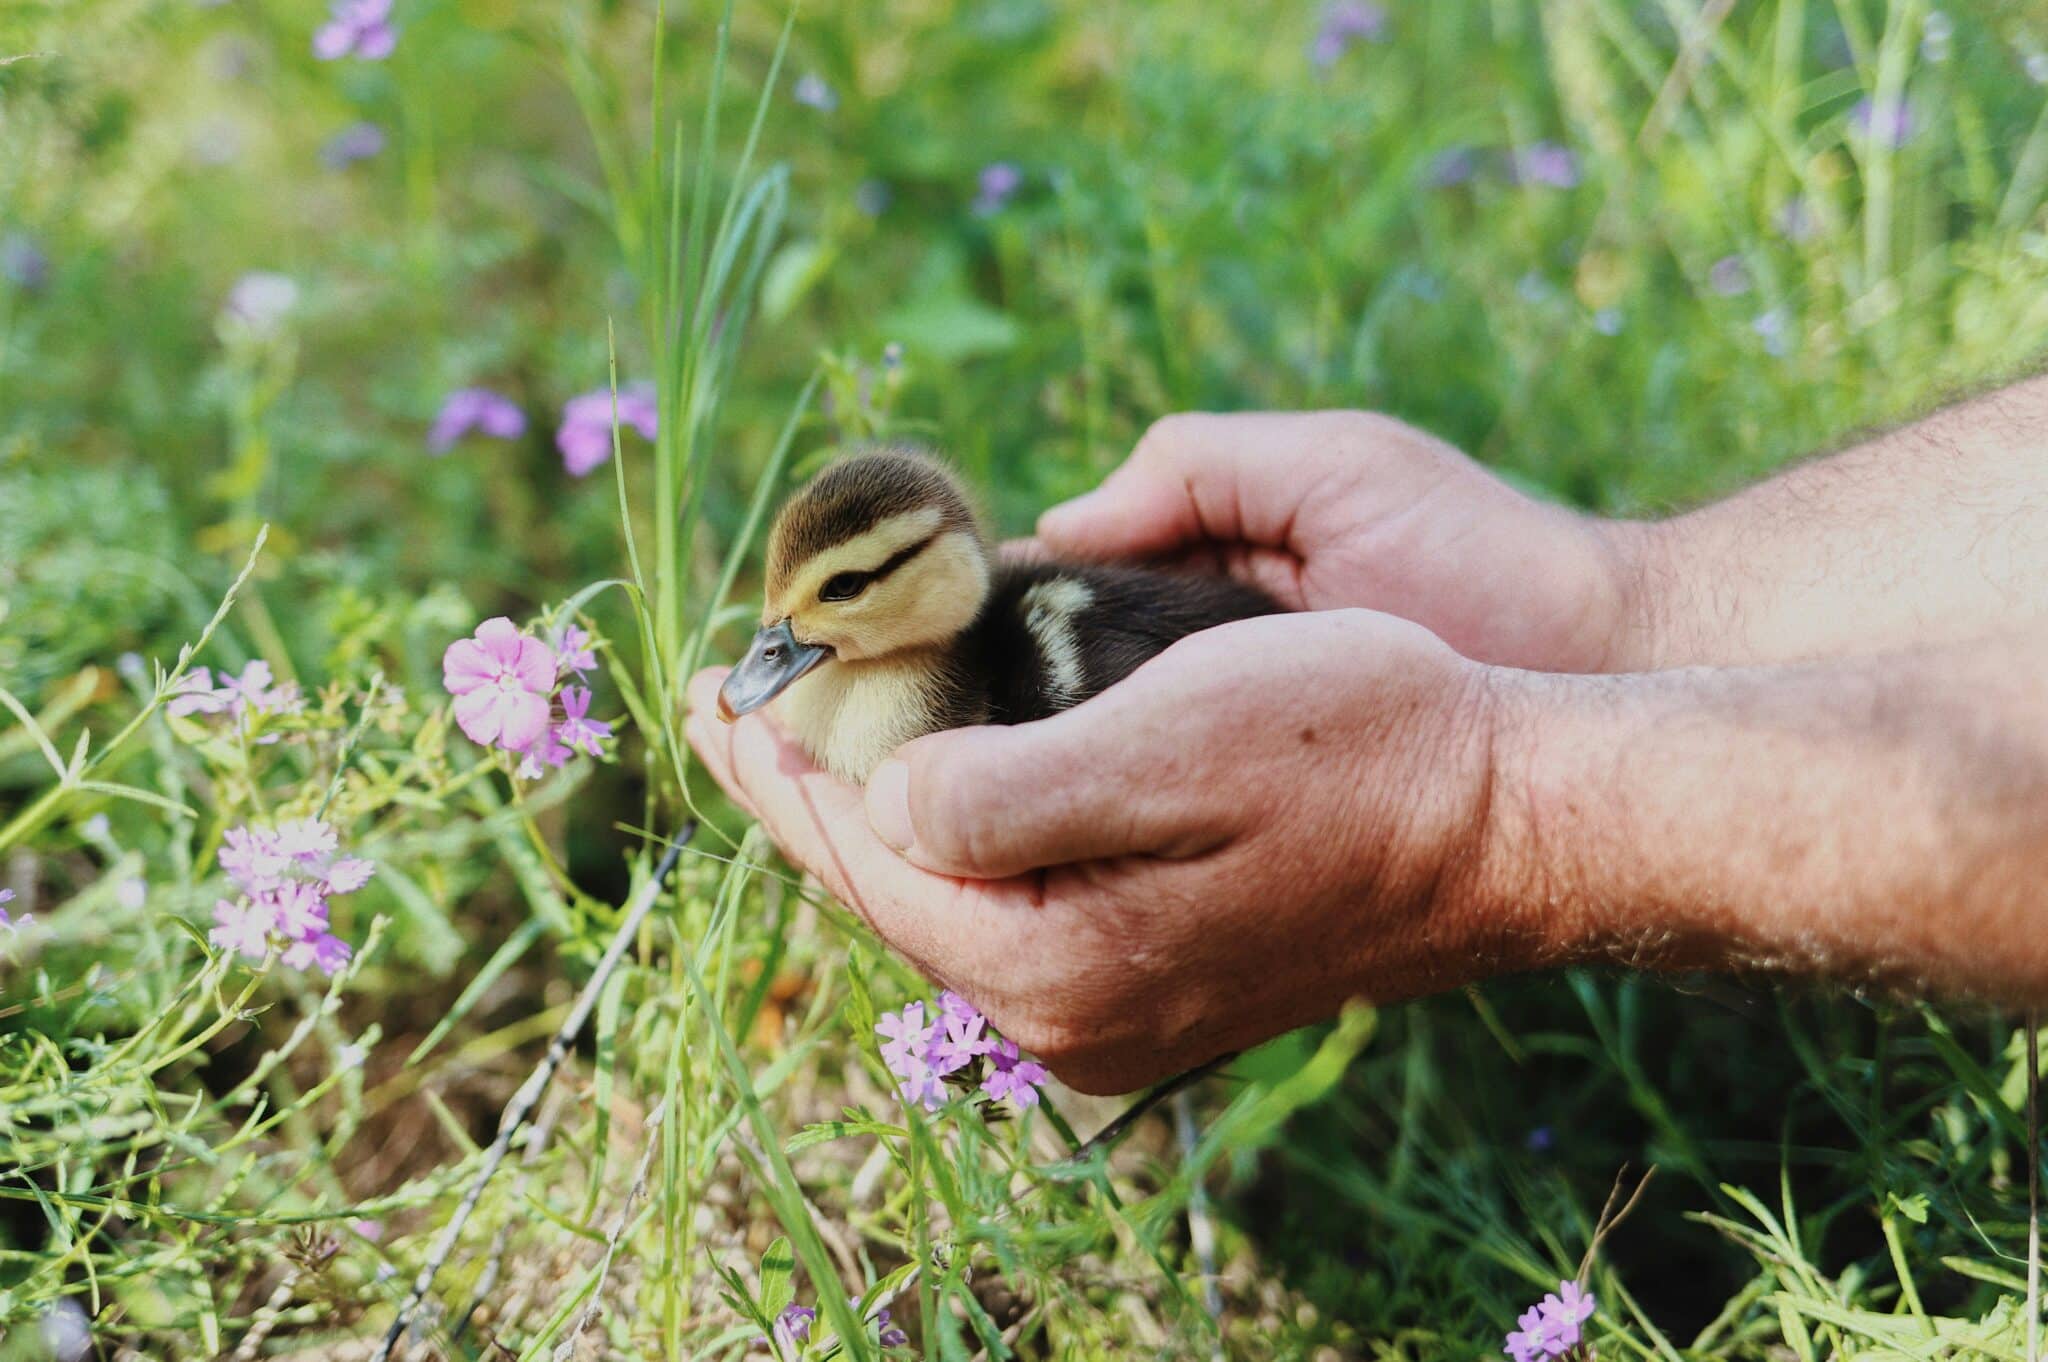 holding a baby duck | Photo by Amy Humphries on Unsplash